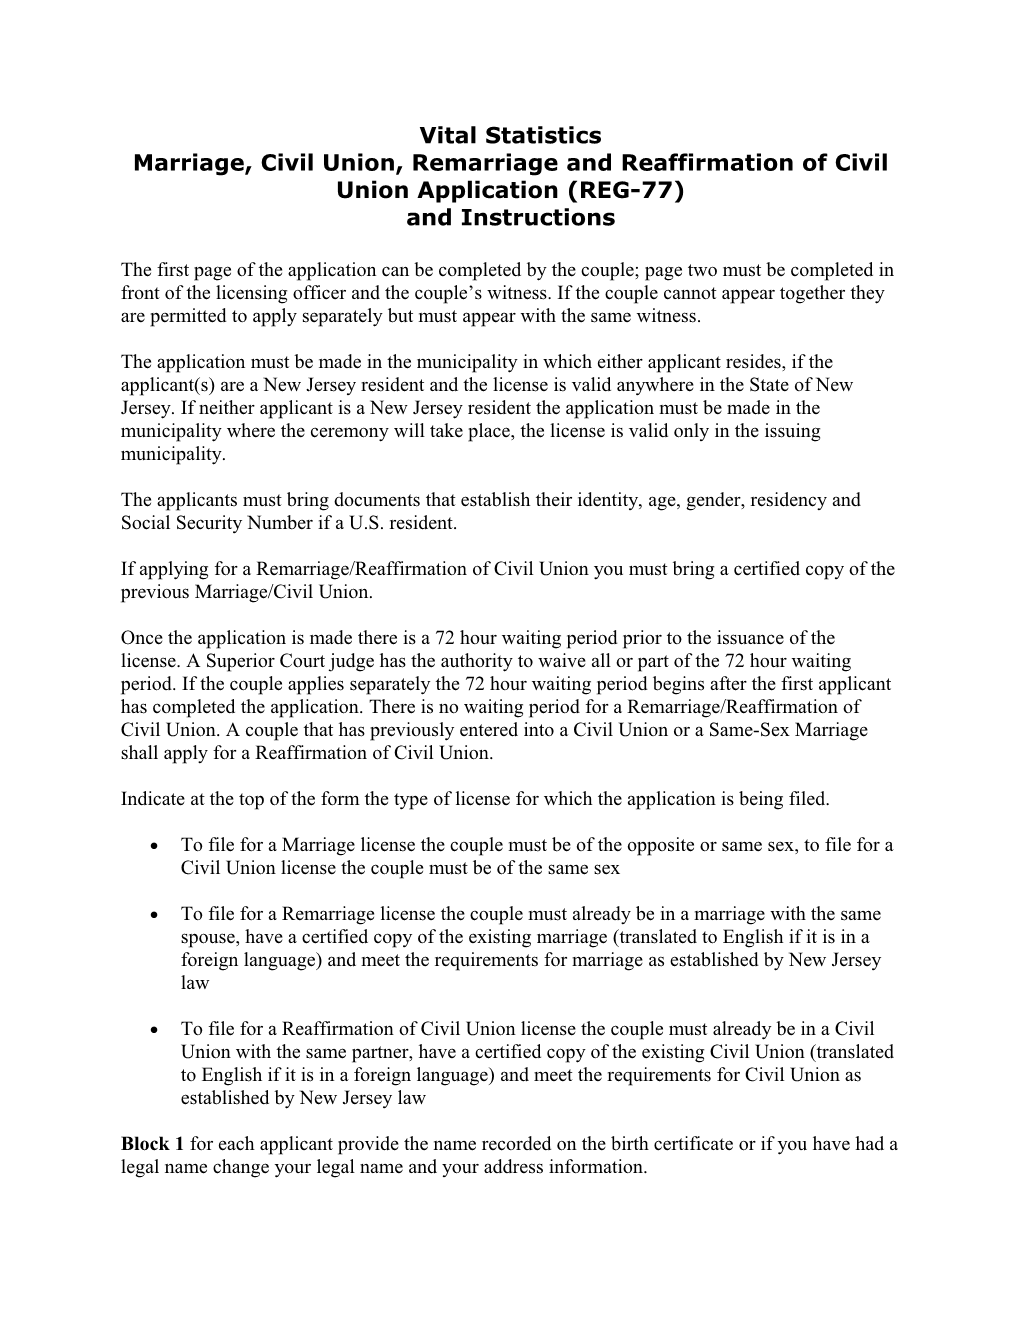 Marriage, Civil Union, Remarriage and Reaffirmation of Civil